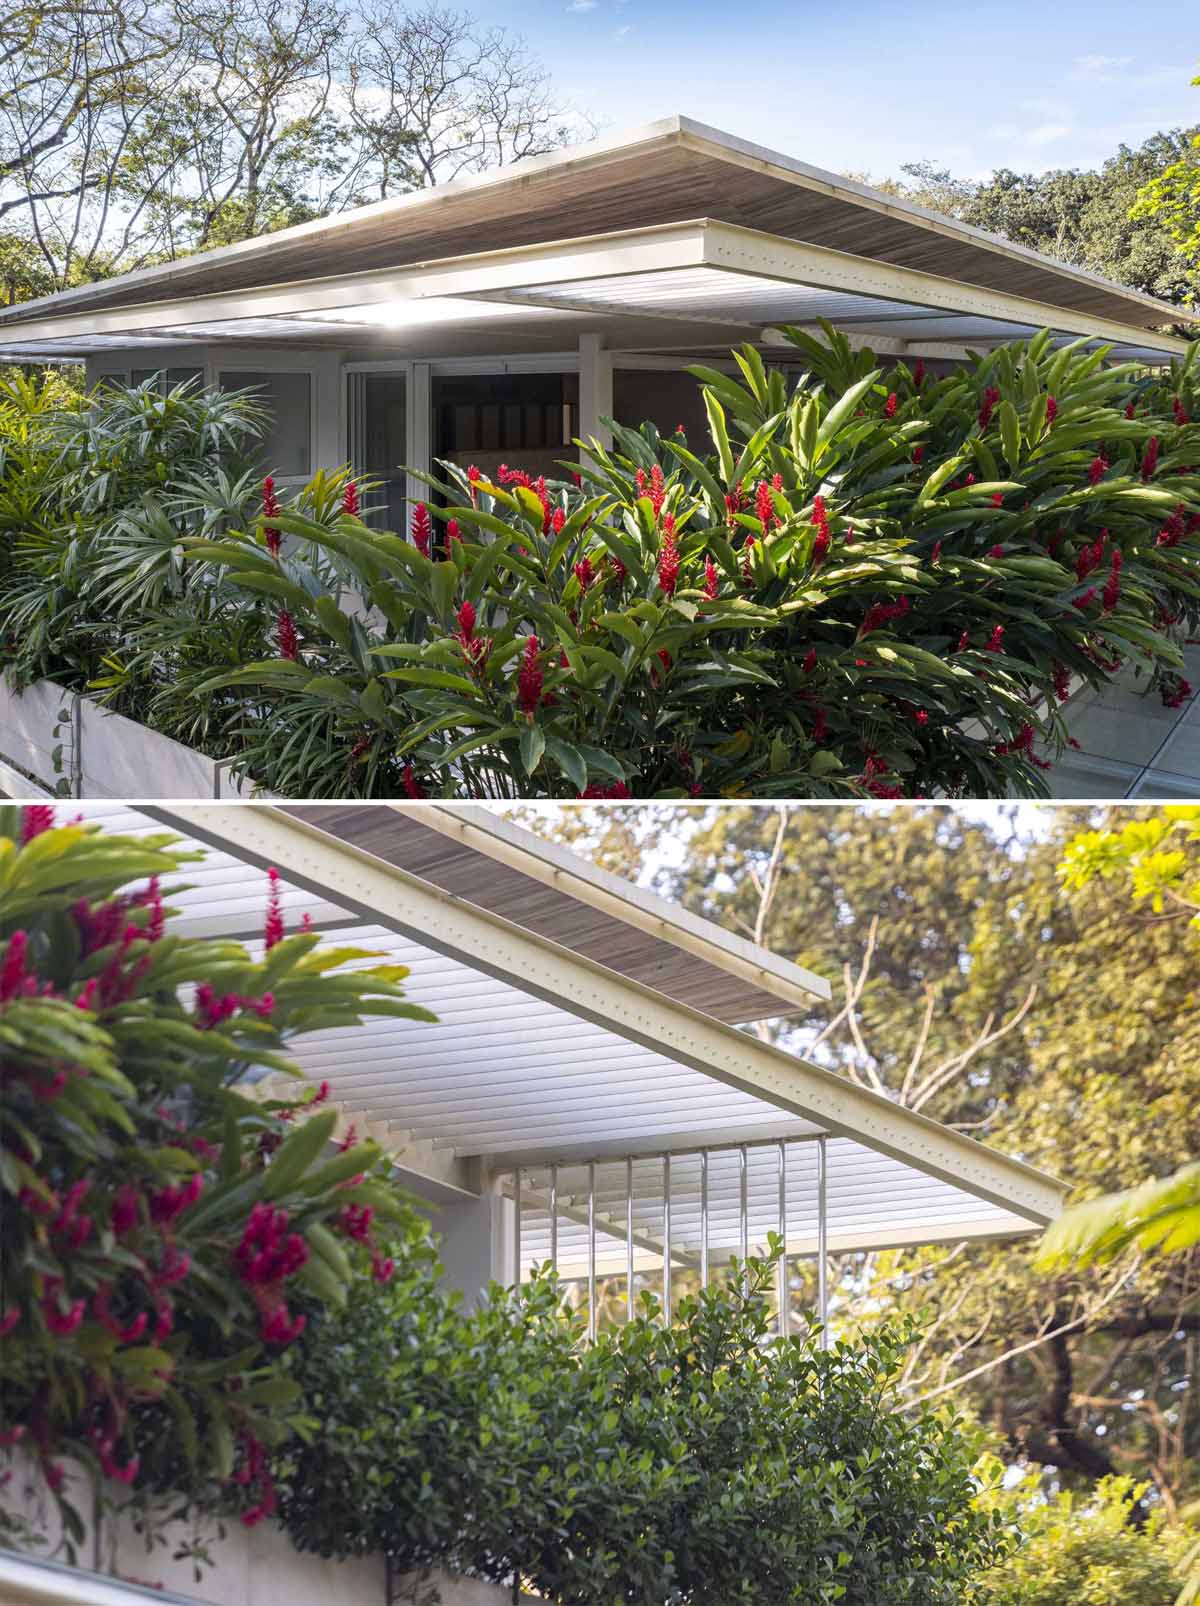 Planter boxes with large tropical plants were placed on the second-floor of this modern home to create privacy and to frame the views.